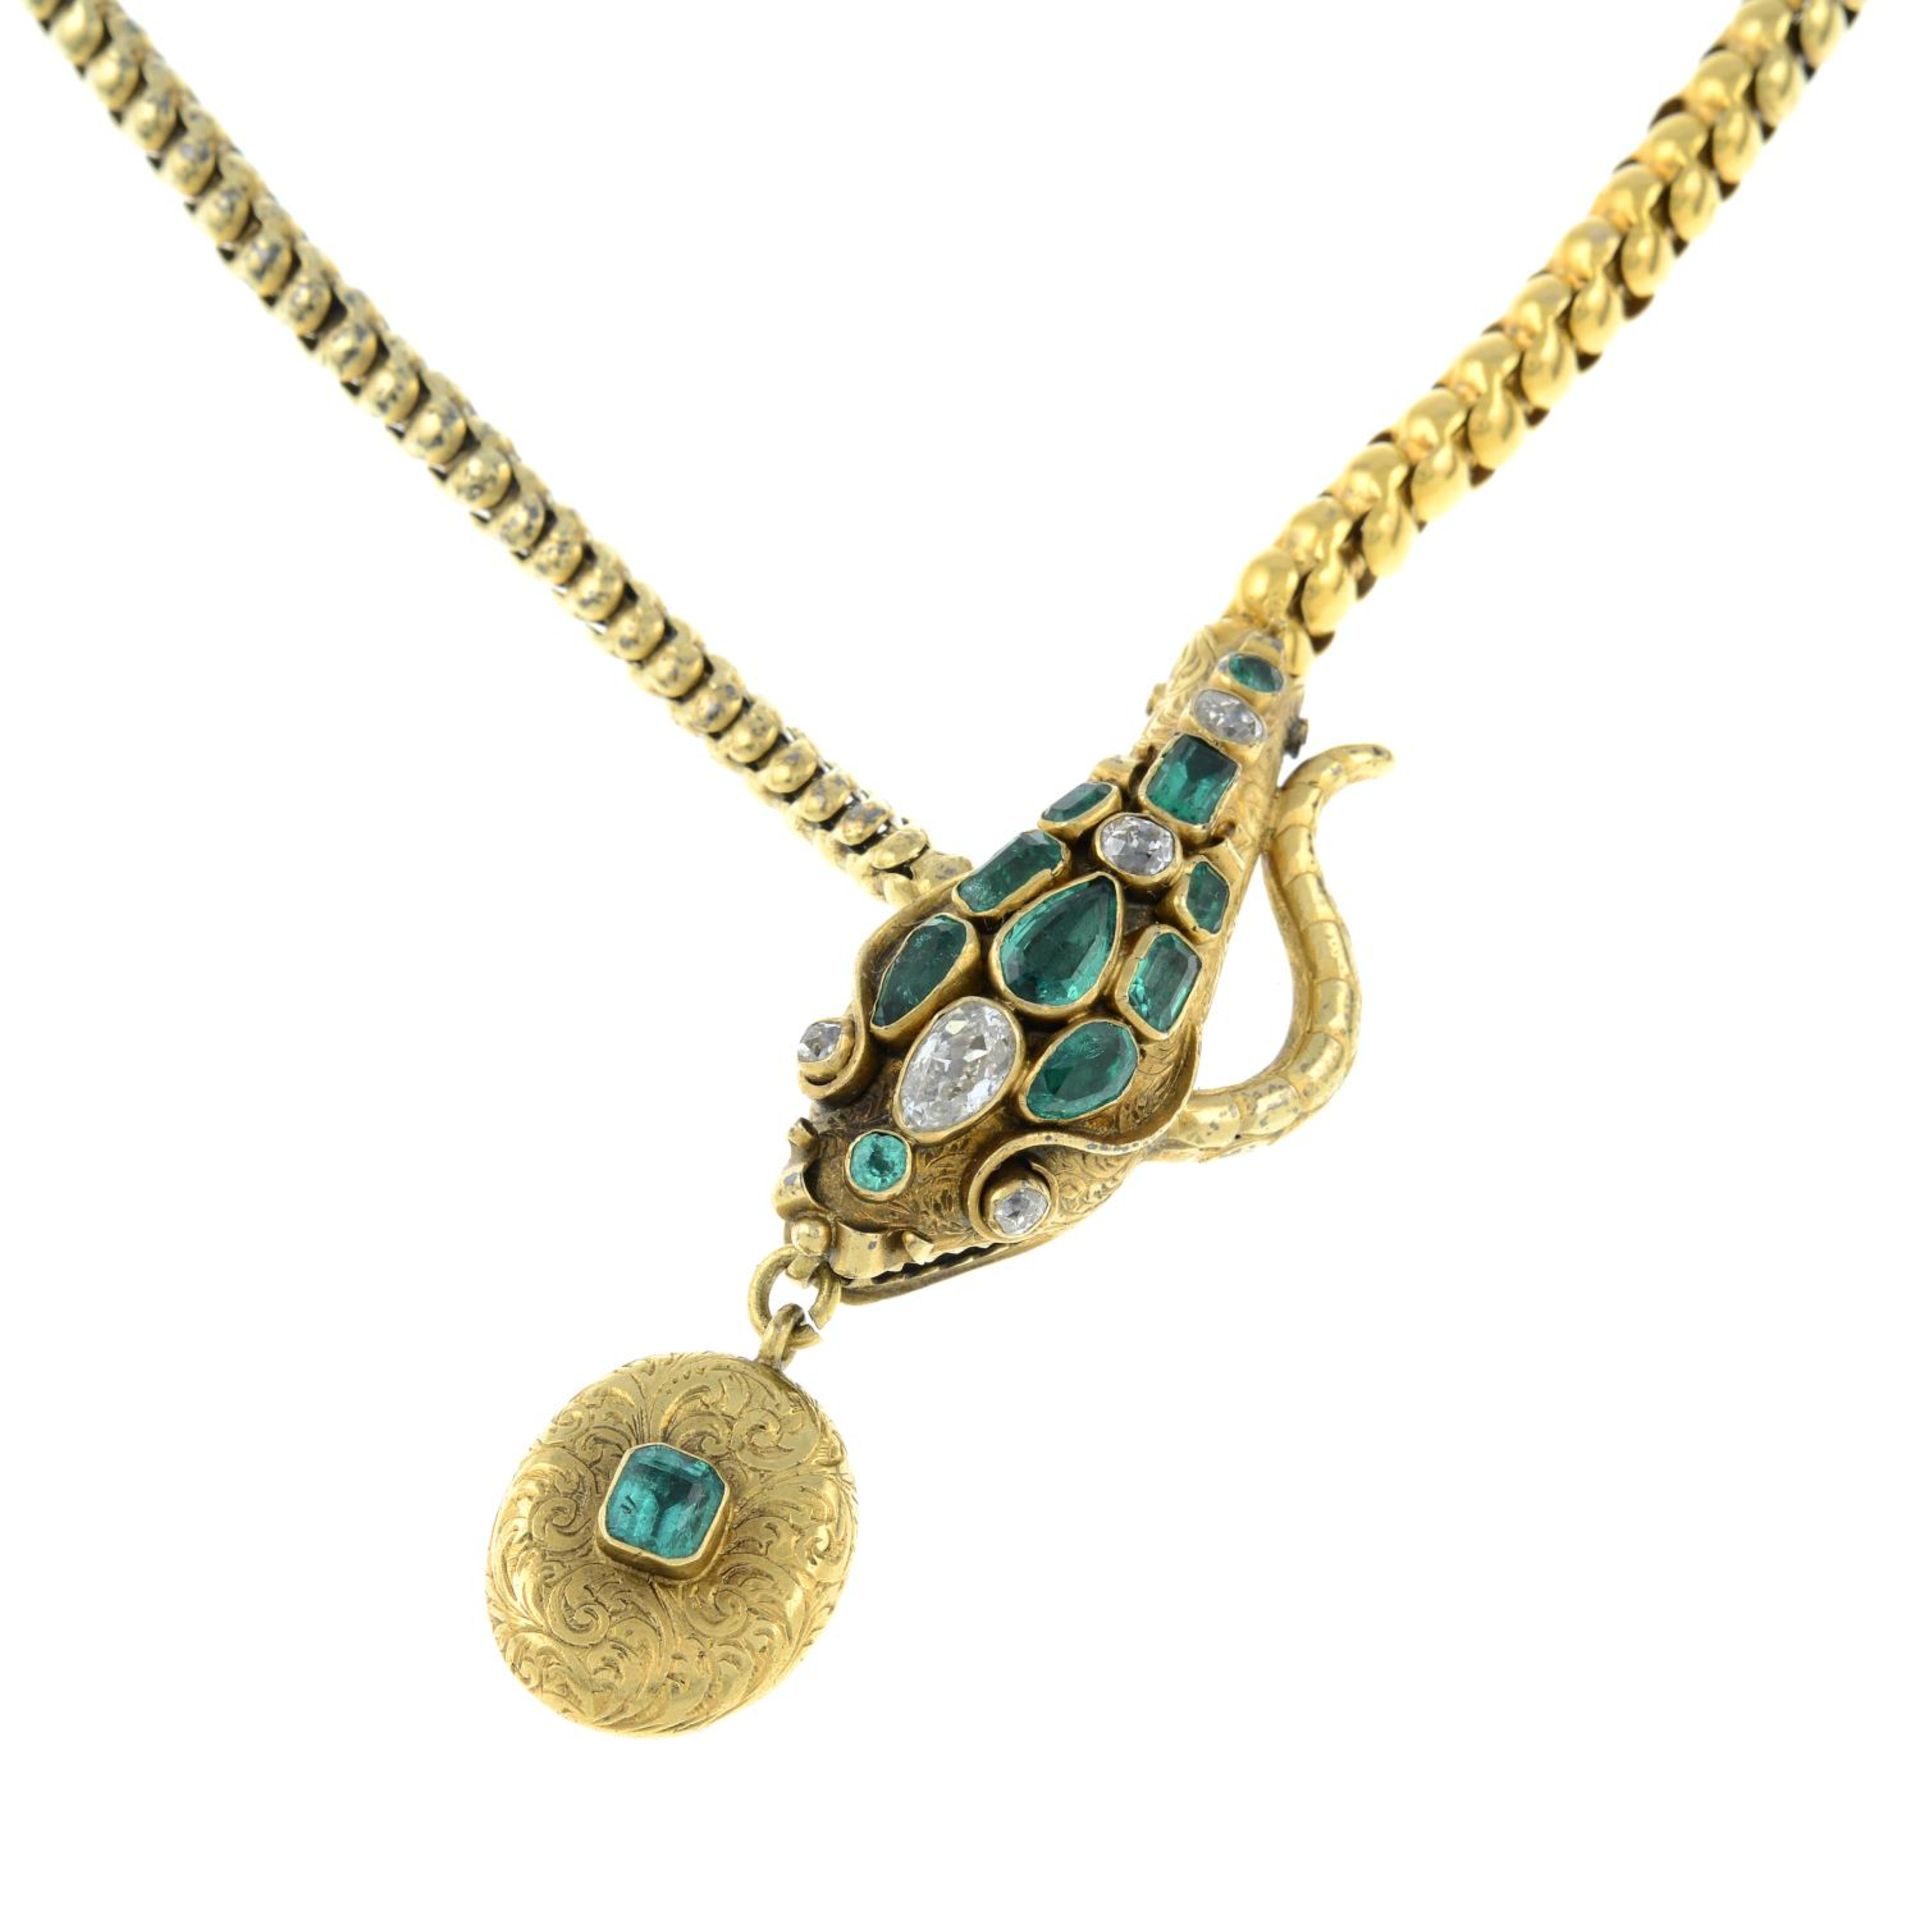 A mid 19th century gold emerald and diamond snake necklace.Estimated total diamond weight 0.50ct, - Image 2 of 5